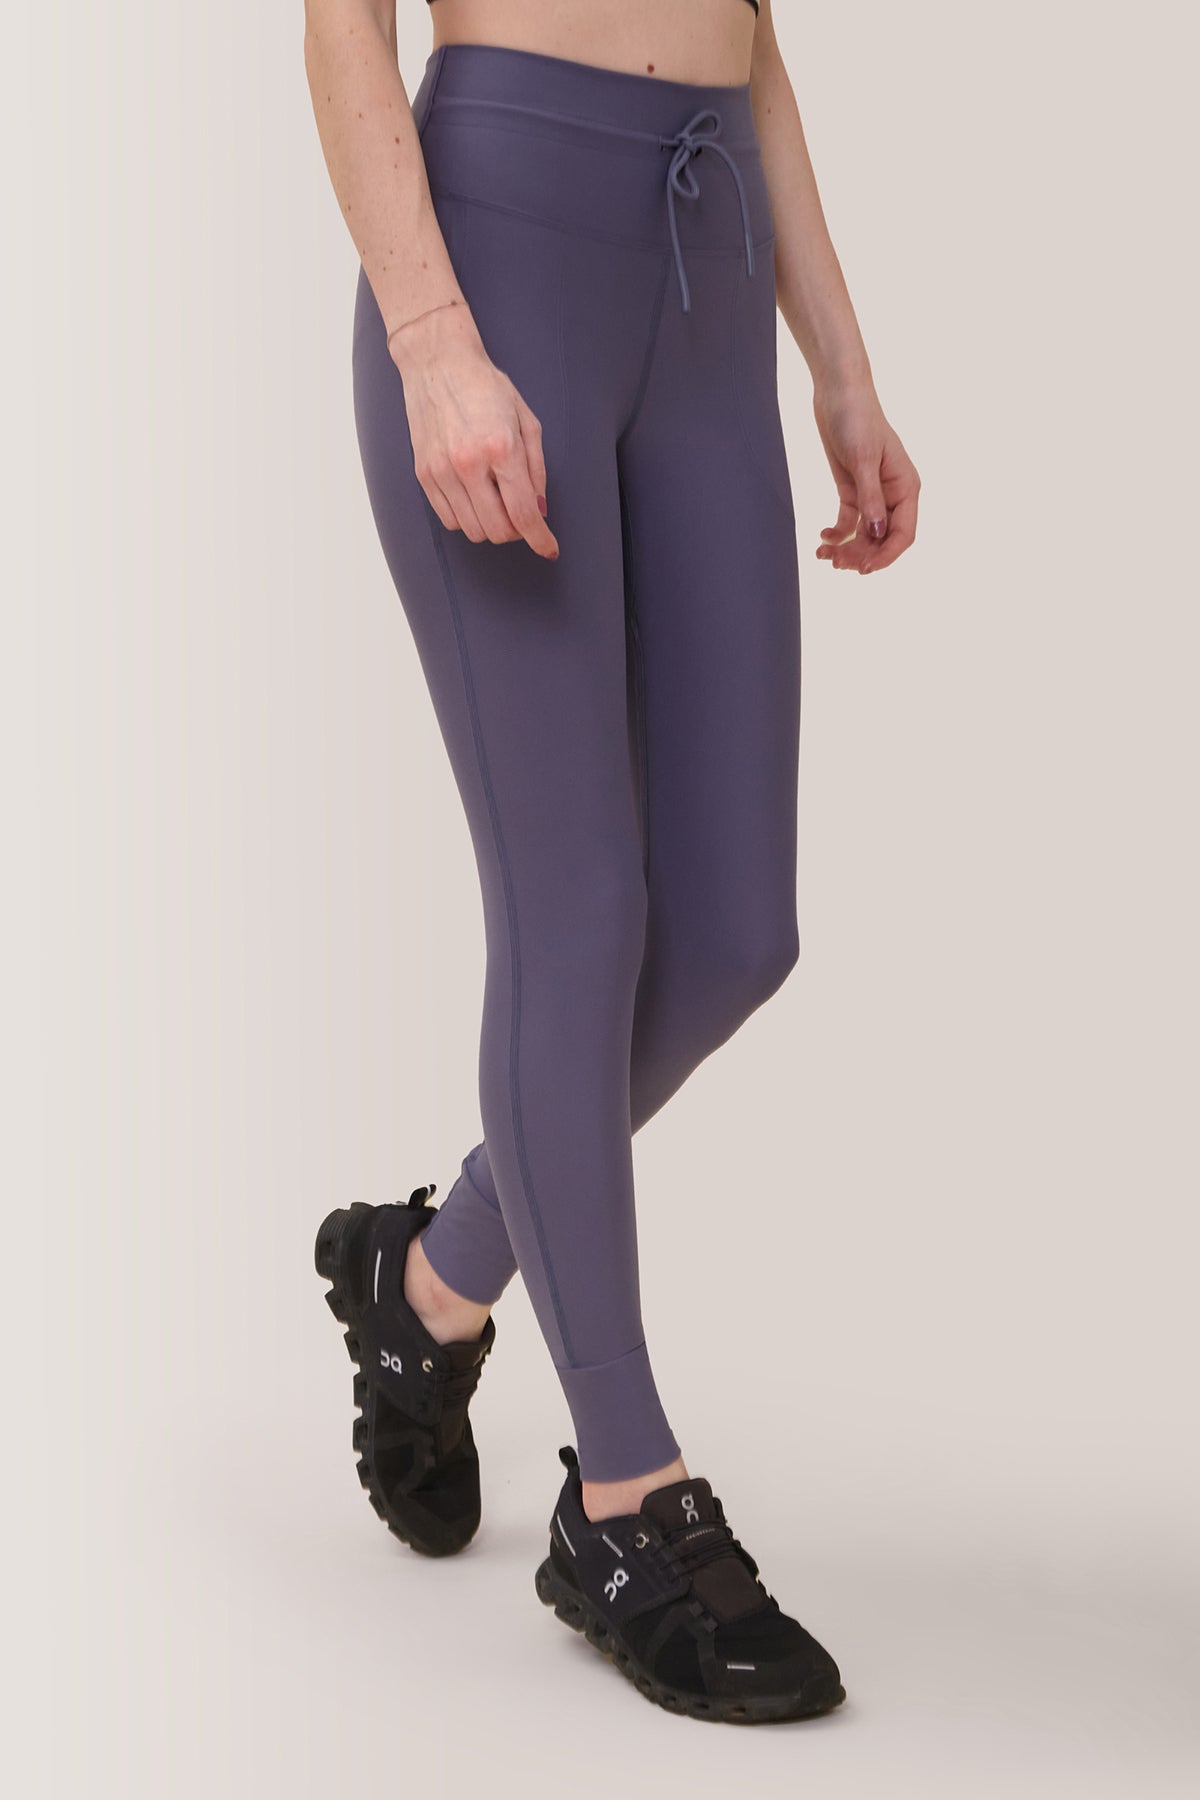 Femme qui porte le legging avec pochettes Stay Flex de Rose Boreal./ Women wearing the Stay Flex Legging with Pockets from Rose Boreal. - Grisaille